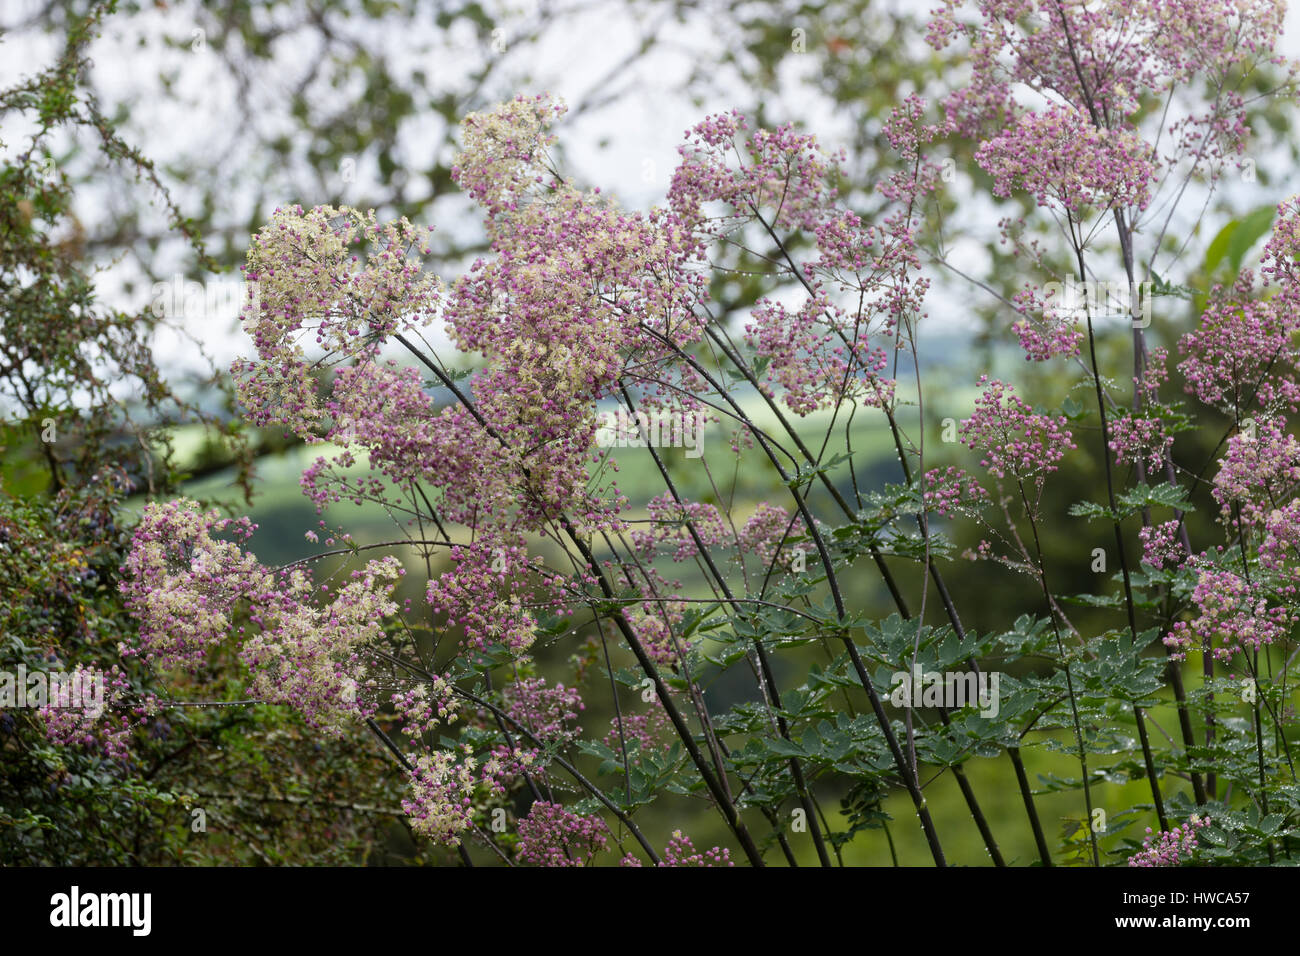 Airy, pink budded, creamy stamened flower sprays of the tall meadow rue, Thalictrum 'Elin' Stock Photo